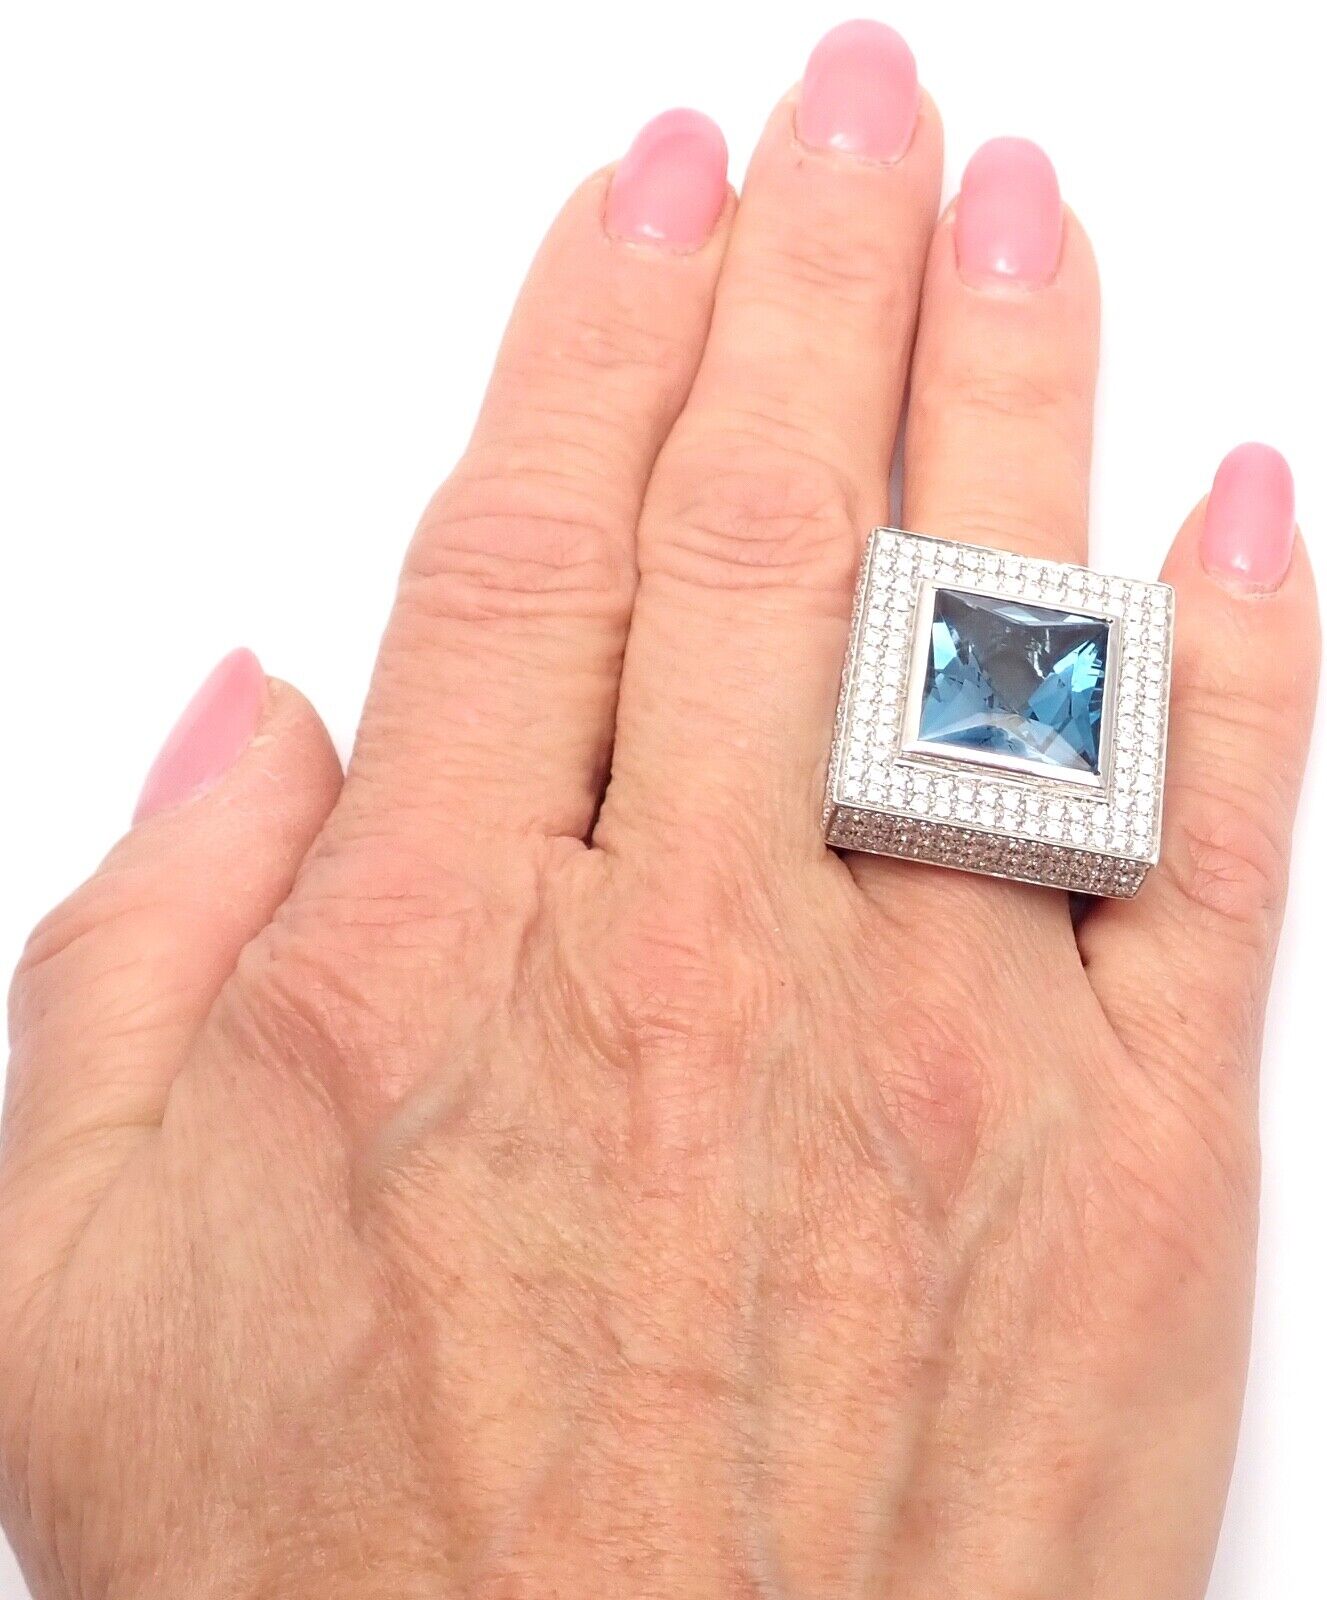 PASQUALE BRUNI Jewelry & Watches:Fine Jewelry:Rings Authentic! Pasquale Bruni 18k White Gold Diamond London Blue Topaz Large Ring